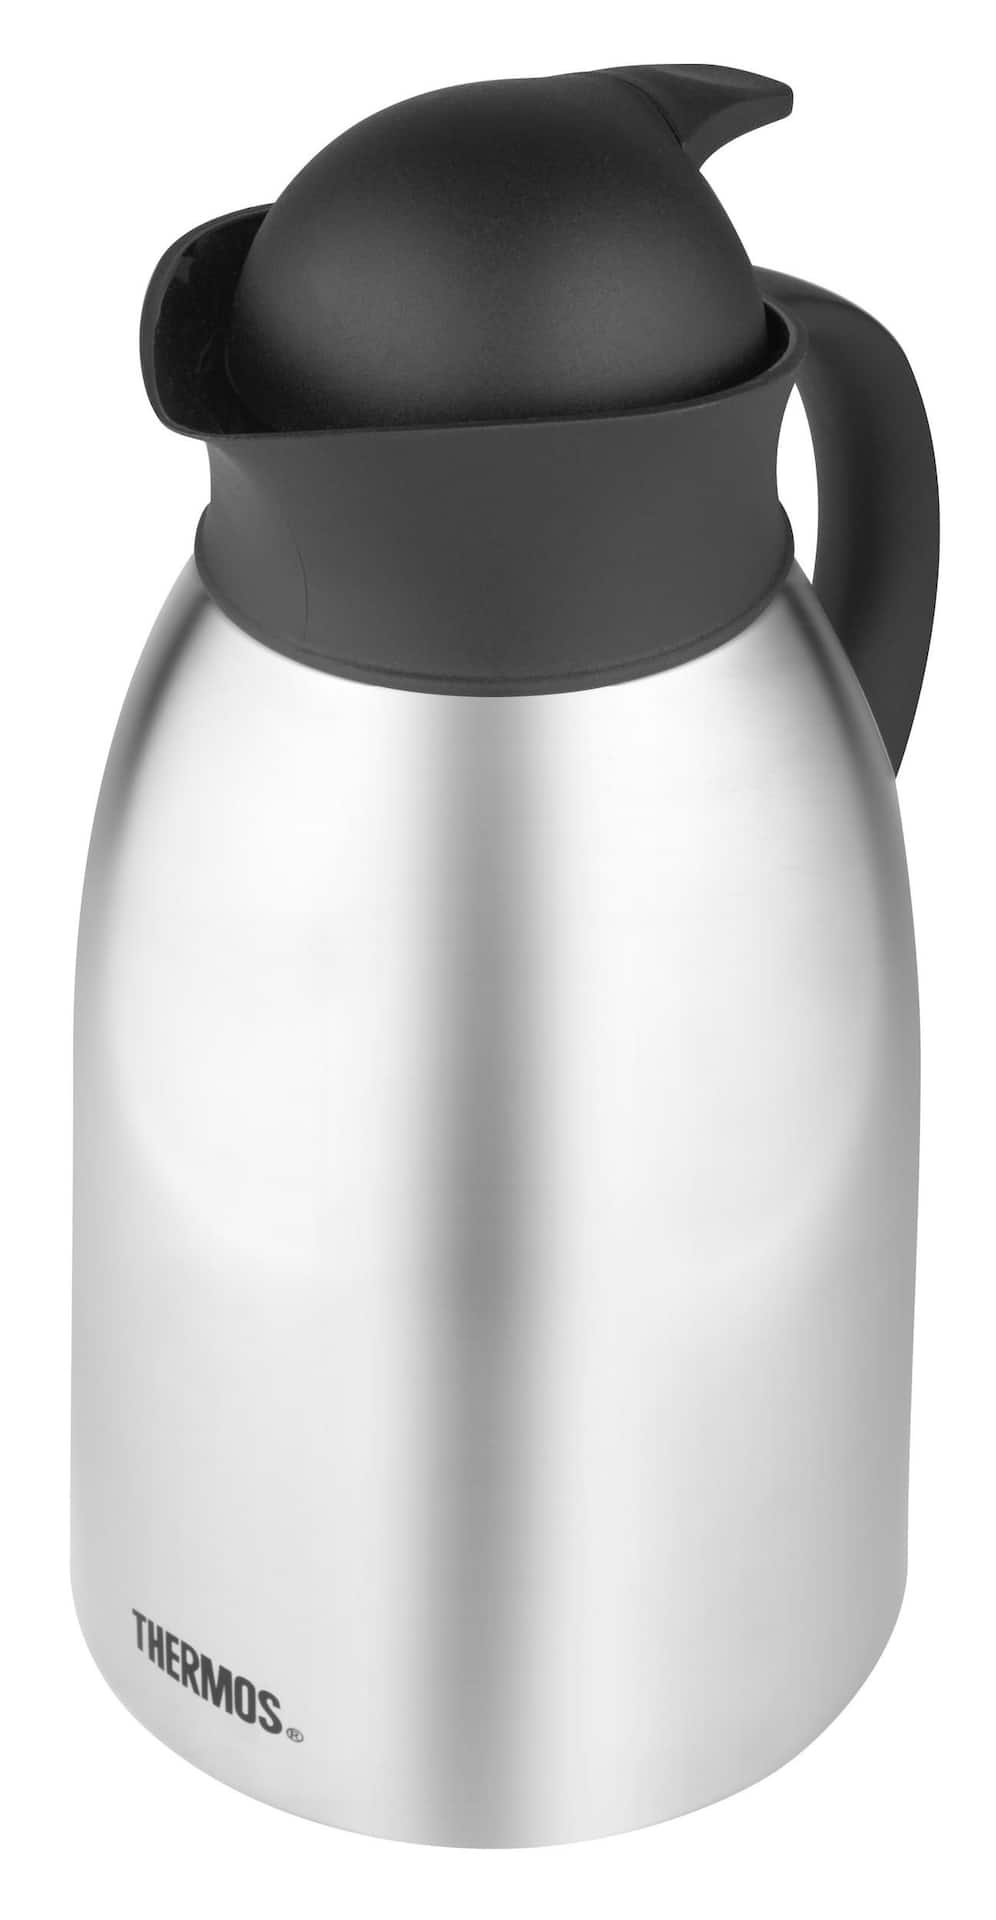 https://media-www.canadiantire.ca/product/living/kitchen/dining-and-entertaining/1421425/thermos-stainless-steel-vacuum-insulated-carafe-1-5l-9e29c9fb-270c-4d21-bdeb-482d9121e0df-jpgrendition.jpg